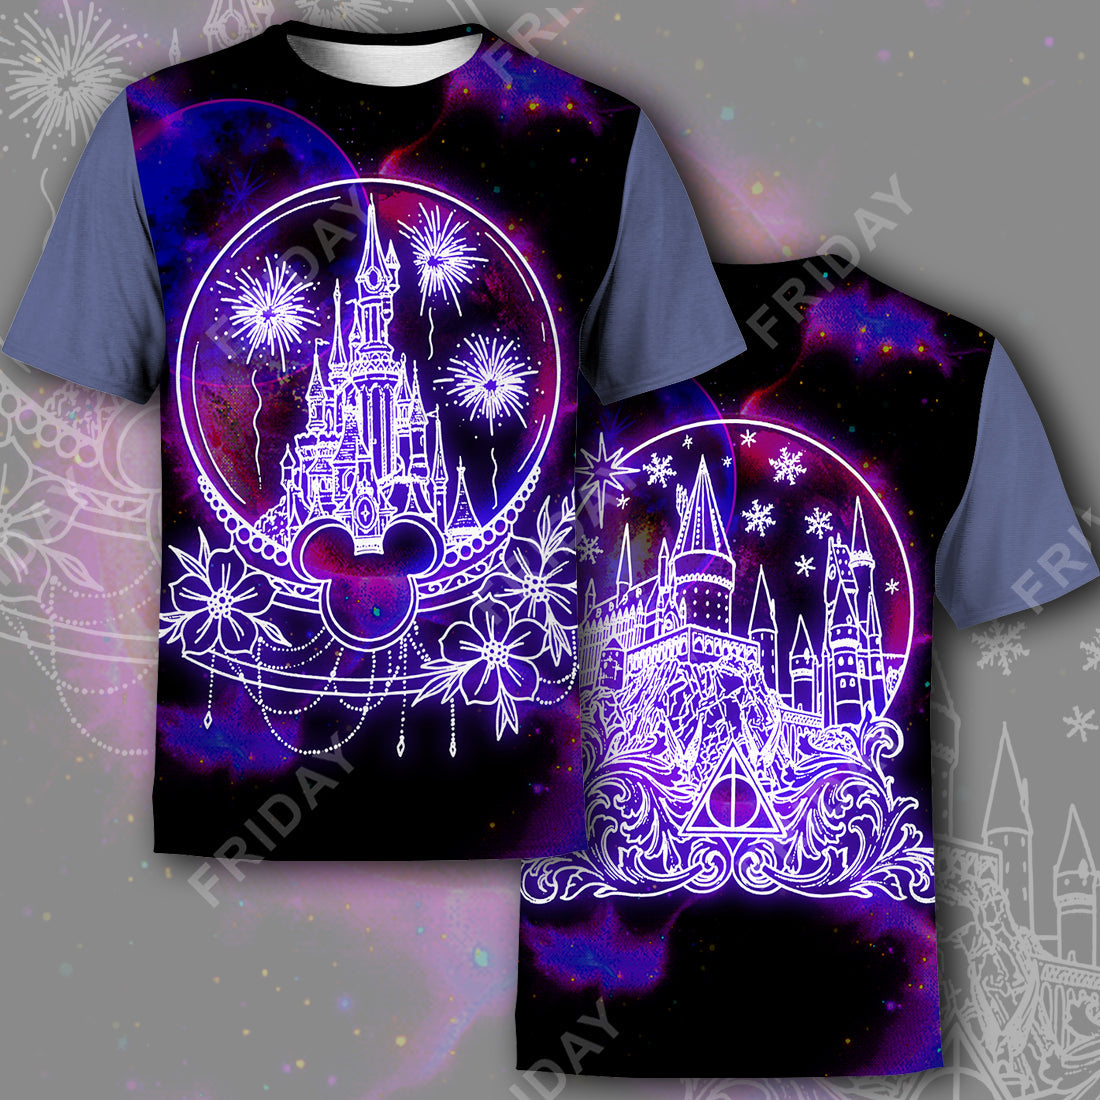 Unifinz DN HP T-shirt DN and HP Castle In Glass Sphere 3D Print T-shirt Amazing High Quality  DN HP Hoodie Sweater Tank  2026